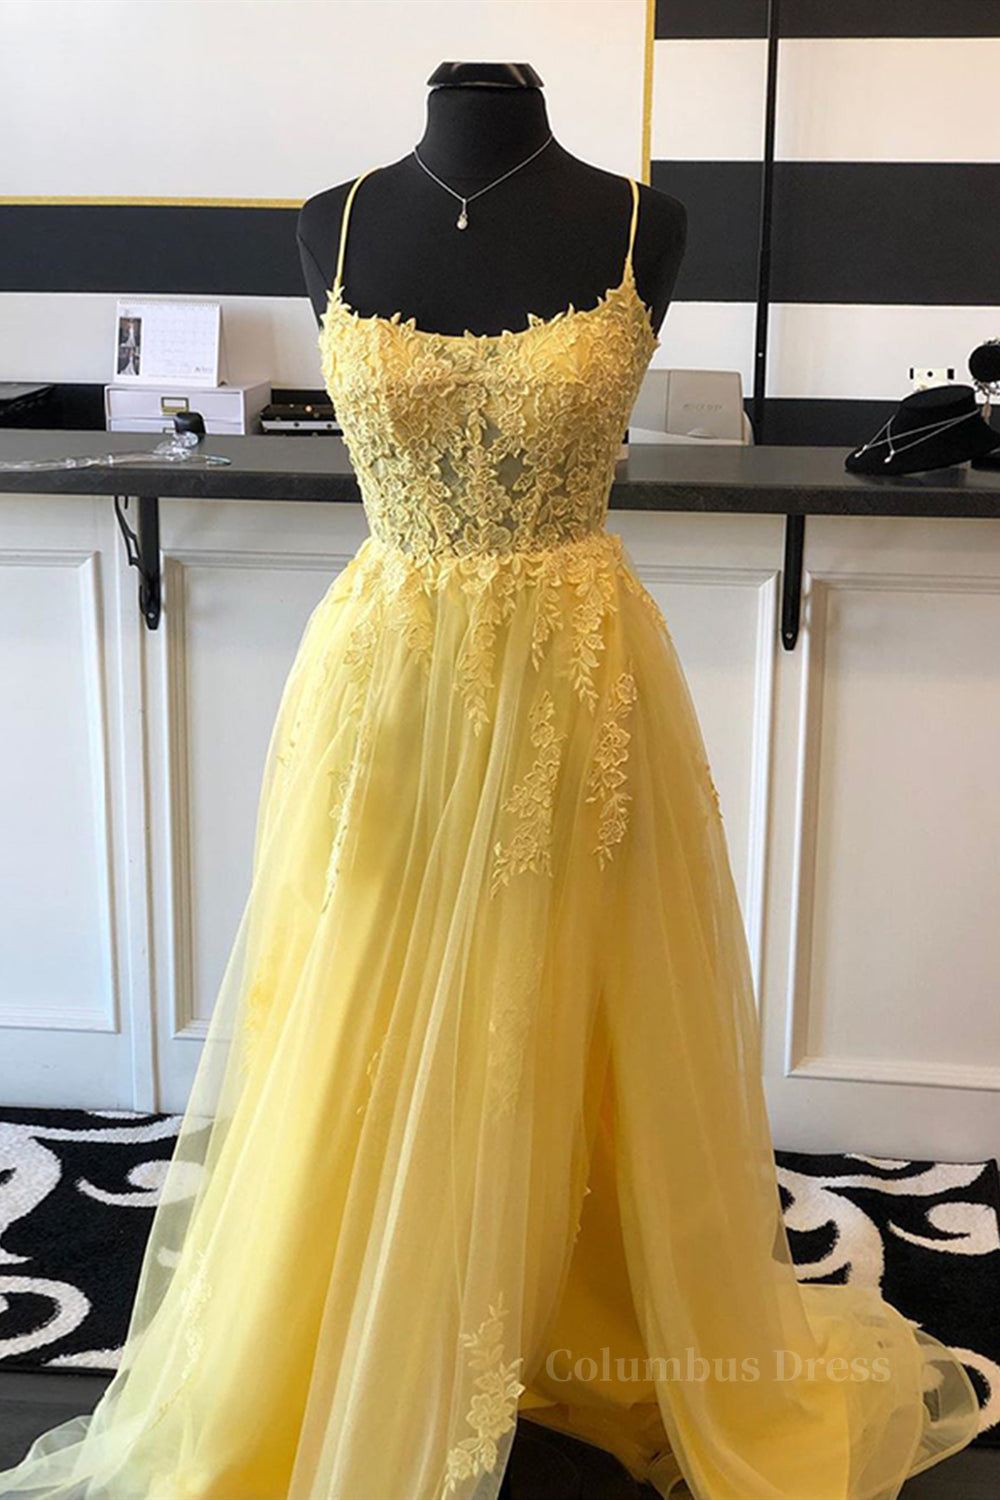 A Line Backless Yellow Lace Floral Long Corset Prom Dress with High Slit, Open Back Yellow Lace Corset Formal Dress, Yellow Lace Evening Dress outfit, Evening Dress Wholesale